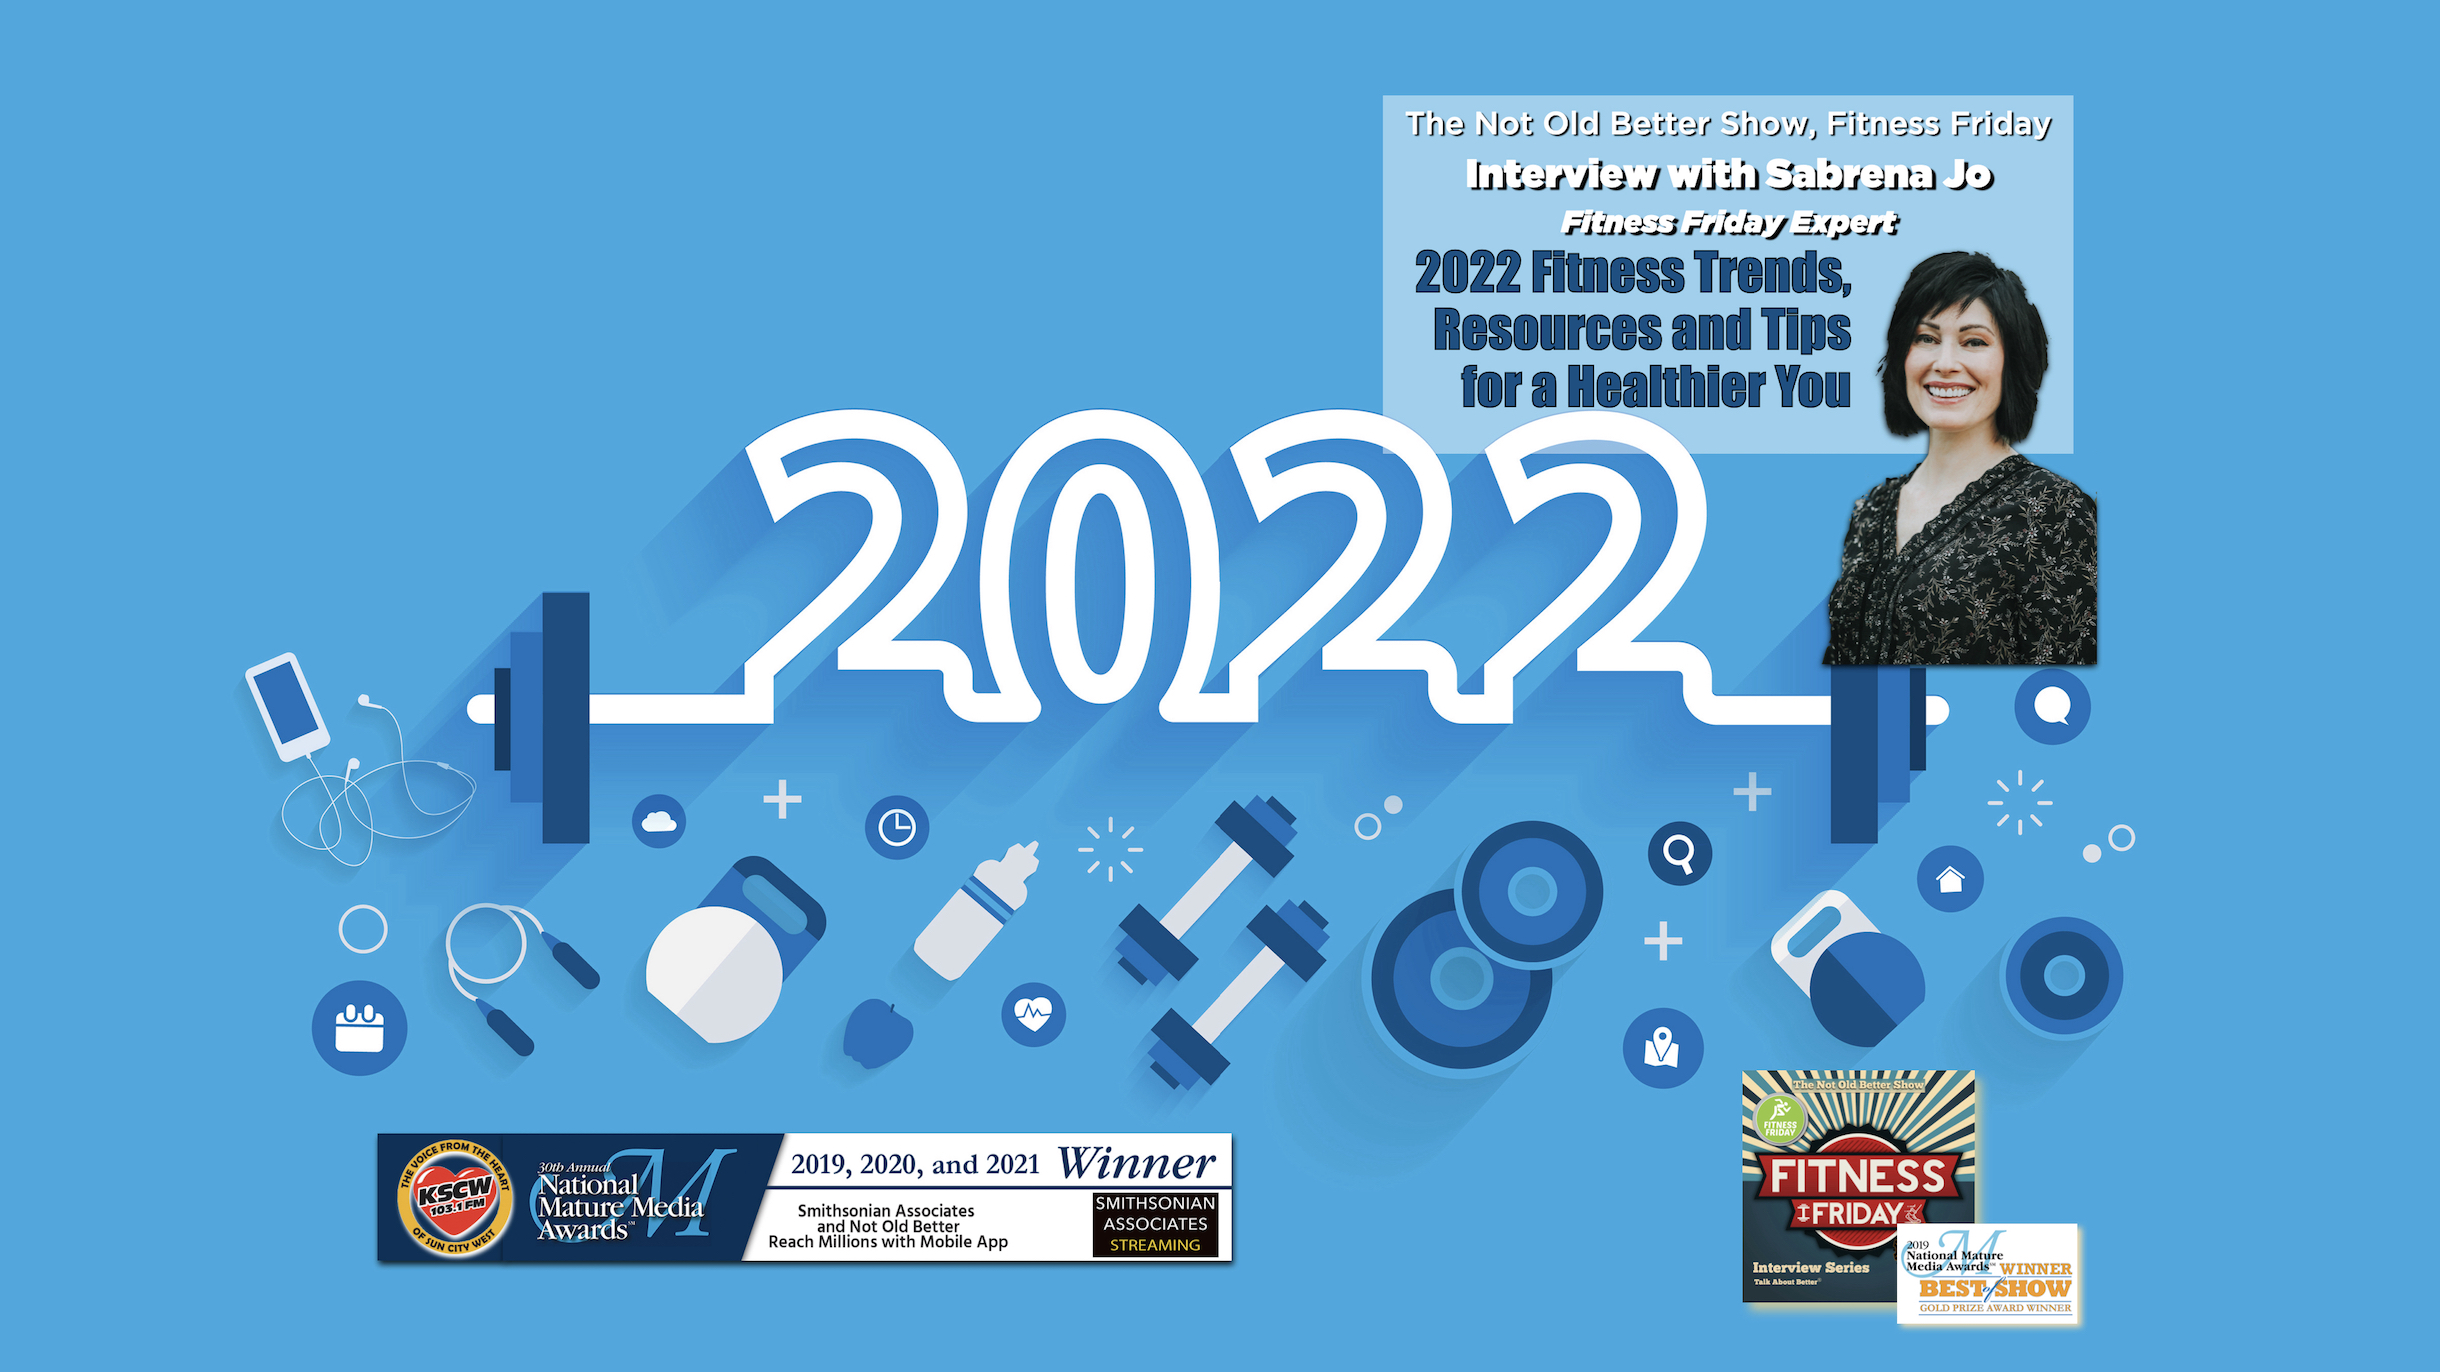 Sabrena Jo New Year’s Fitness Show 2021 – 2022